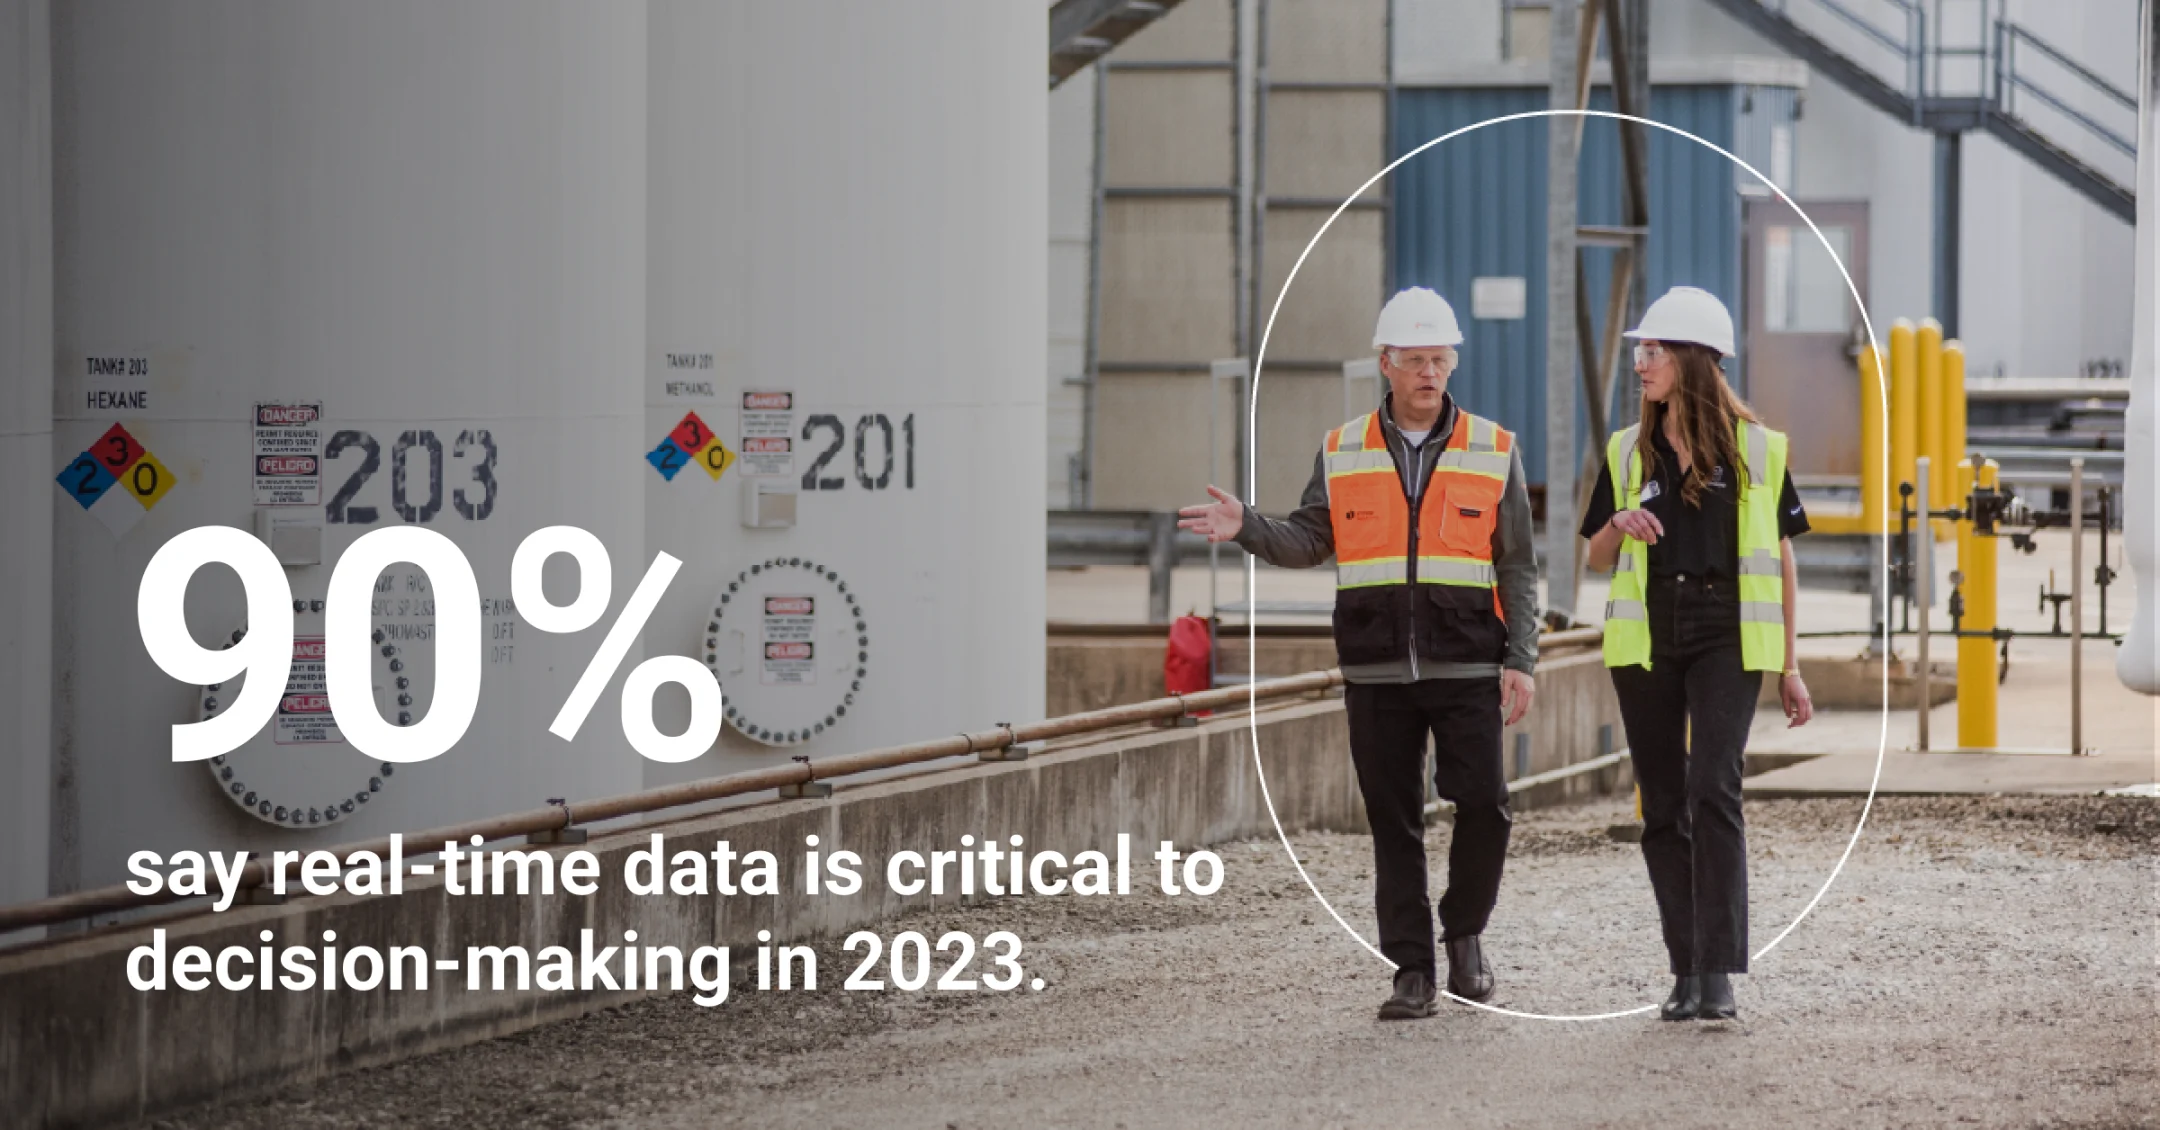 90% say real-time data is critical to decision-making